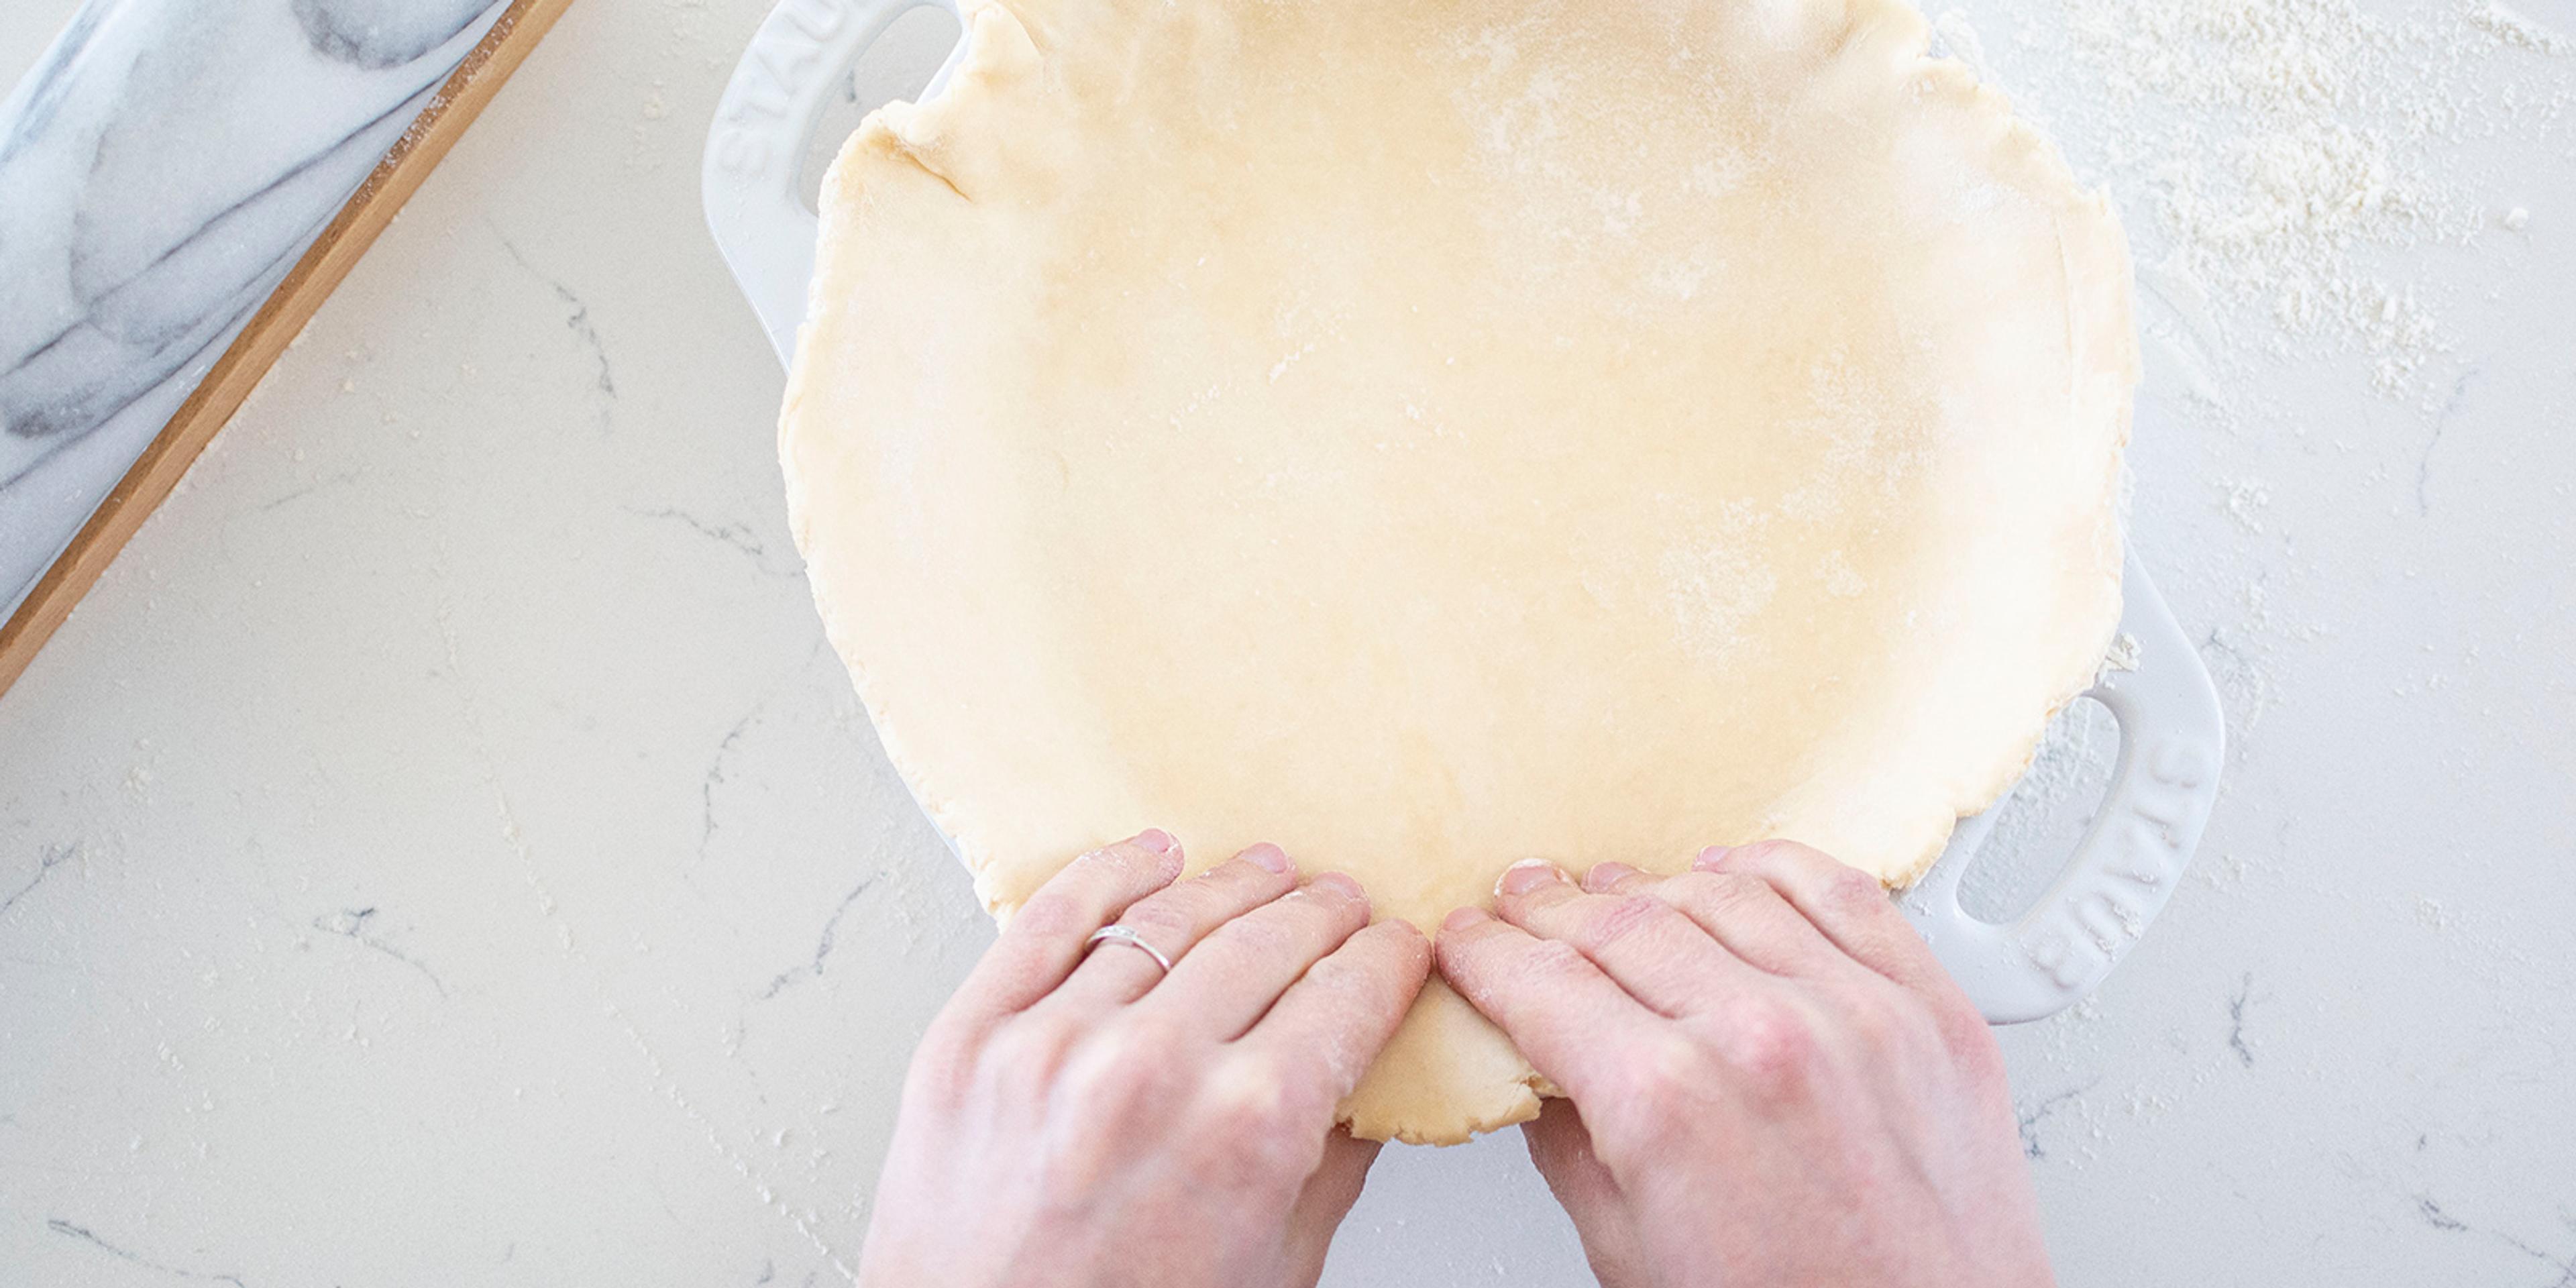 Hands shaping an all-butter pie crust into a pan. Mimi Council photo